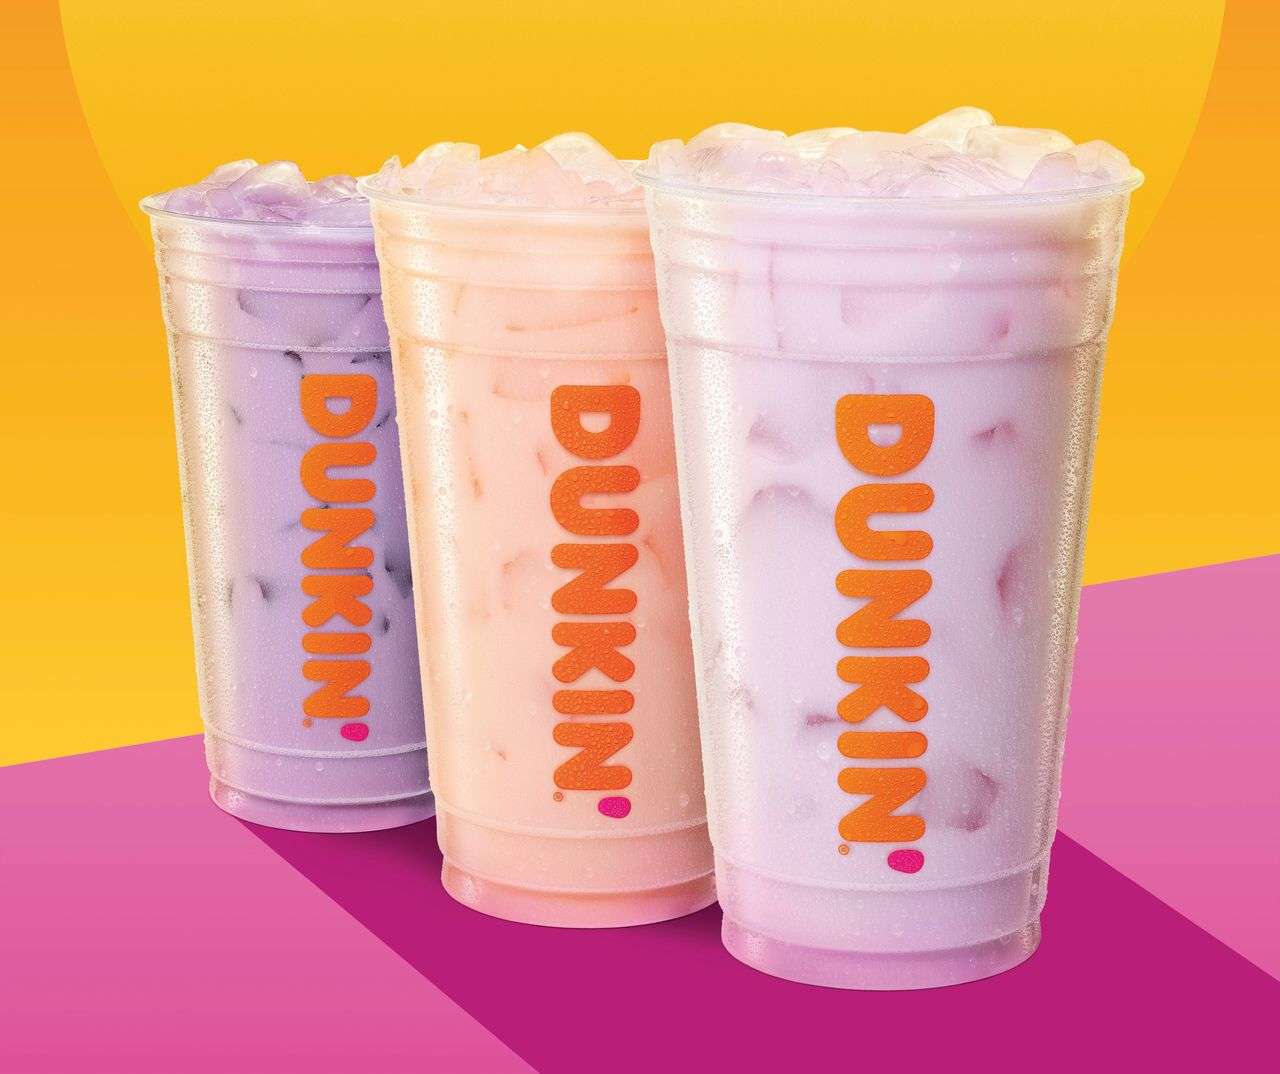 Dunkin expands non